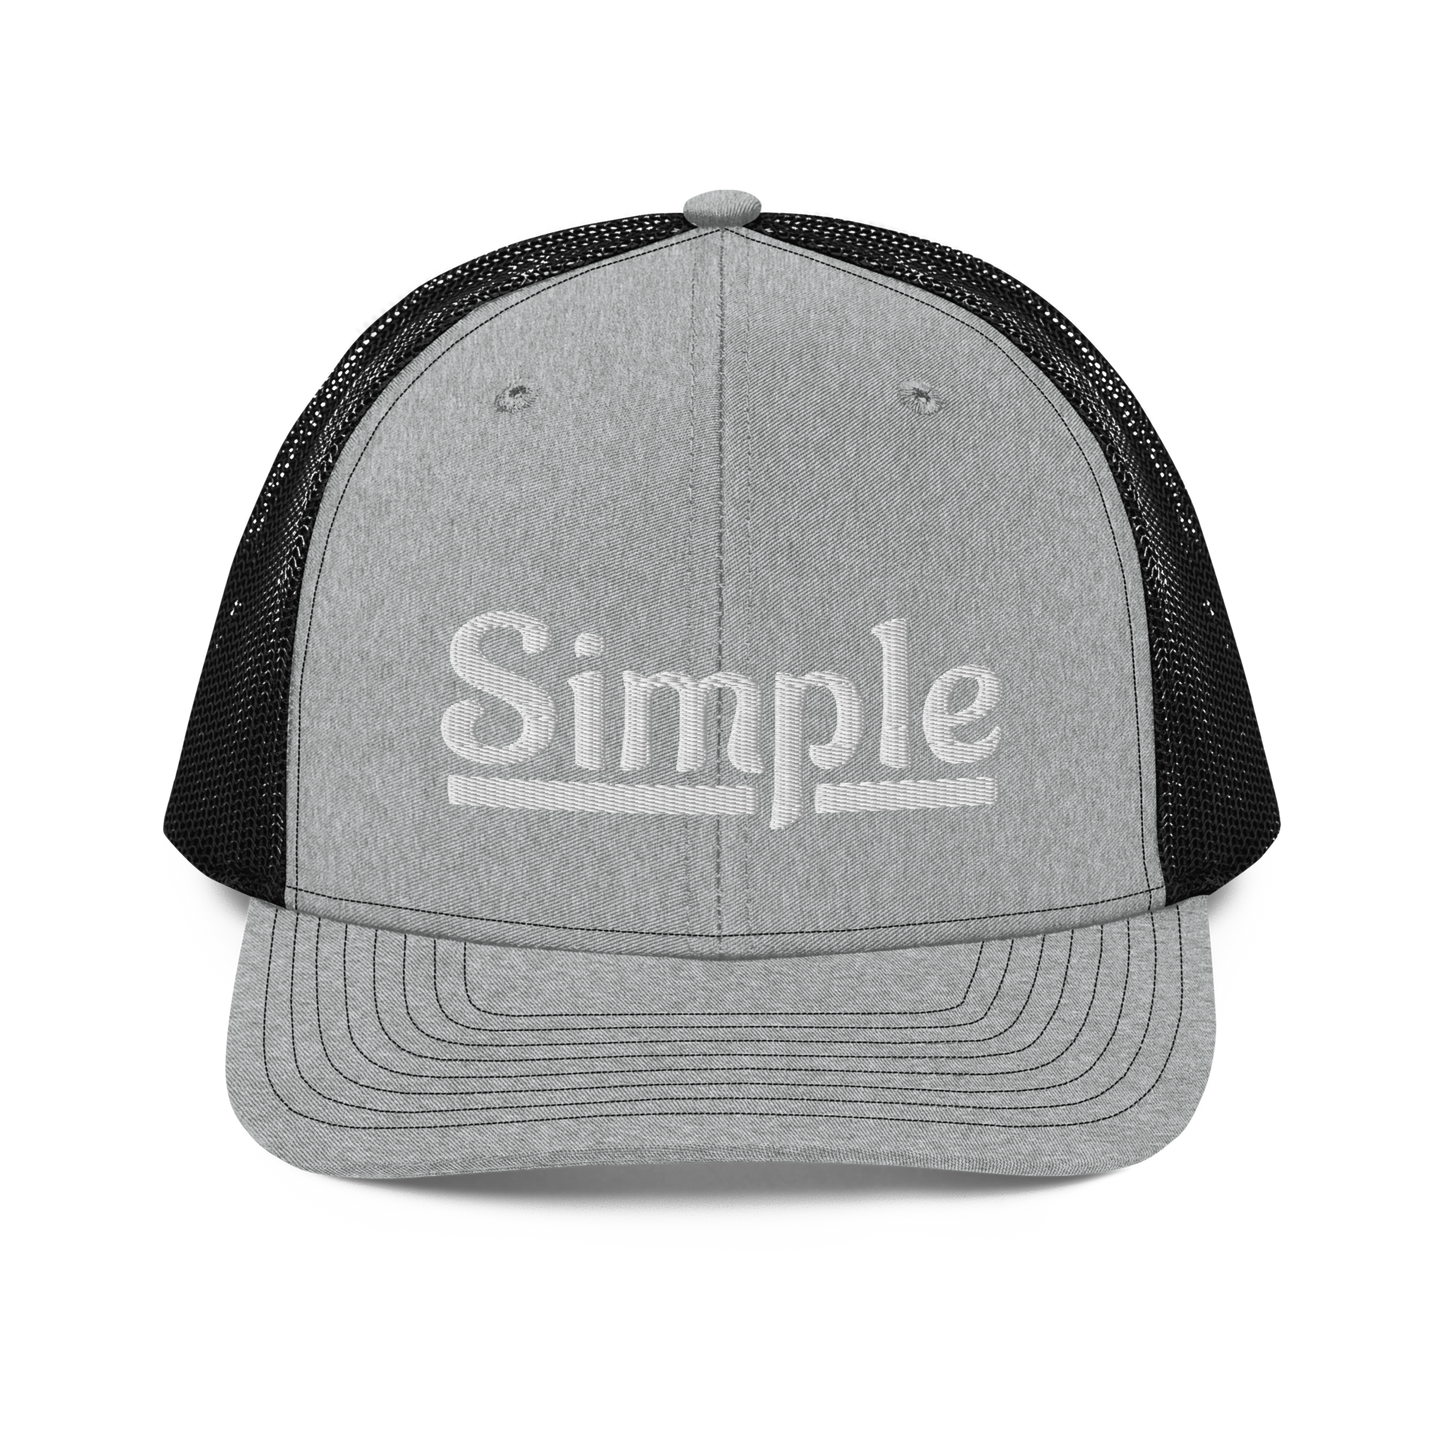 Simple Embroidery 112 Snapback Cap